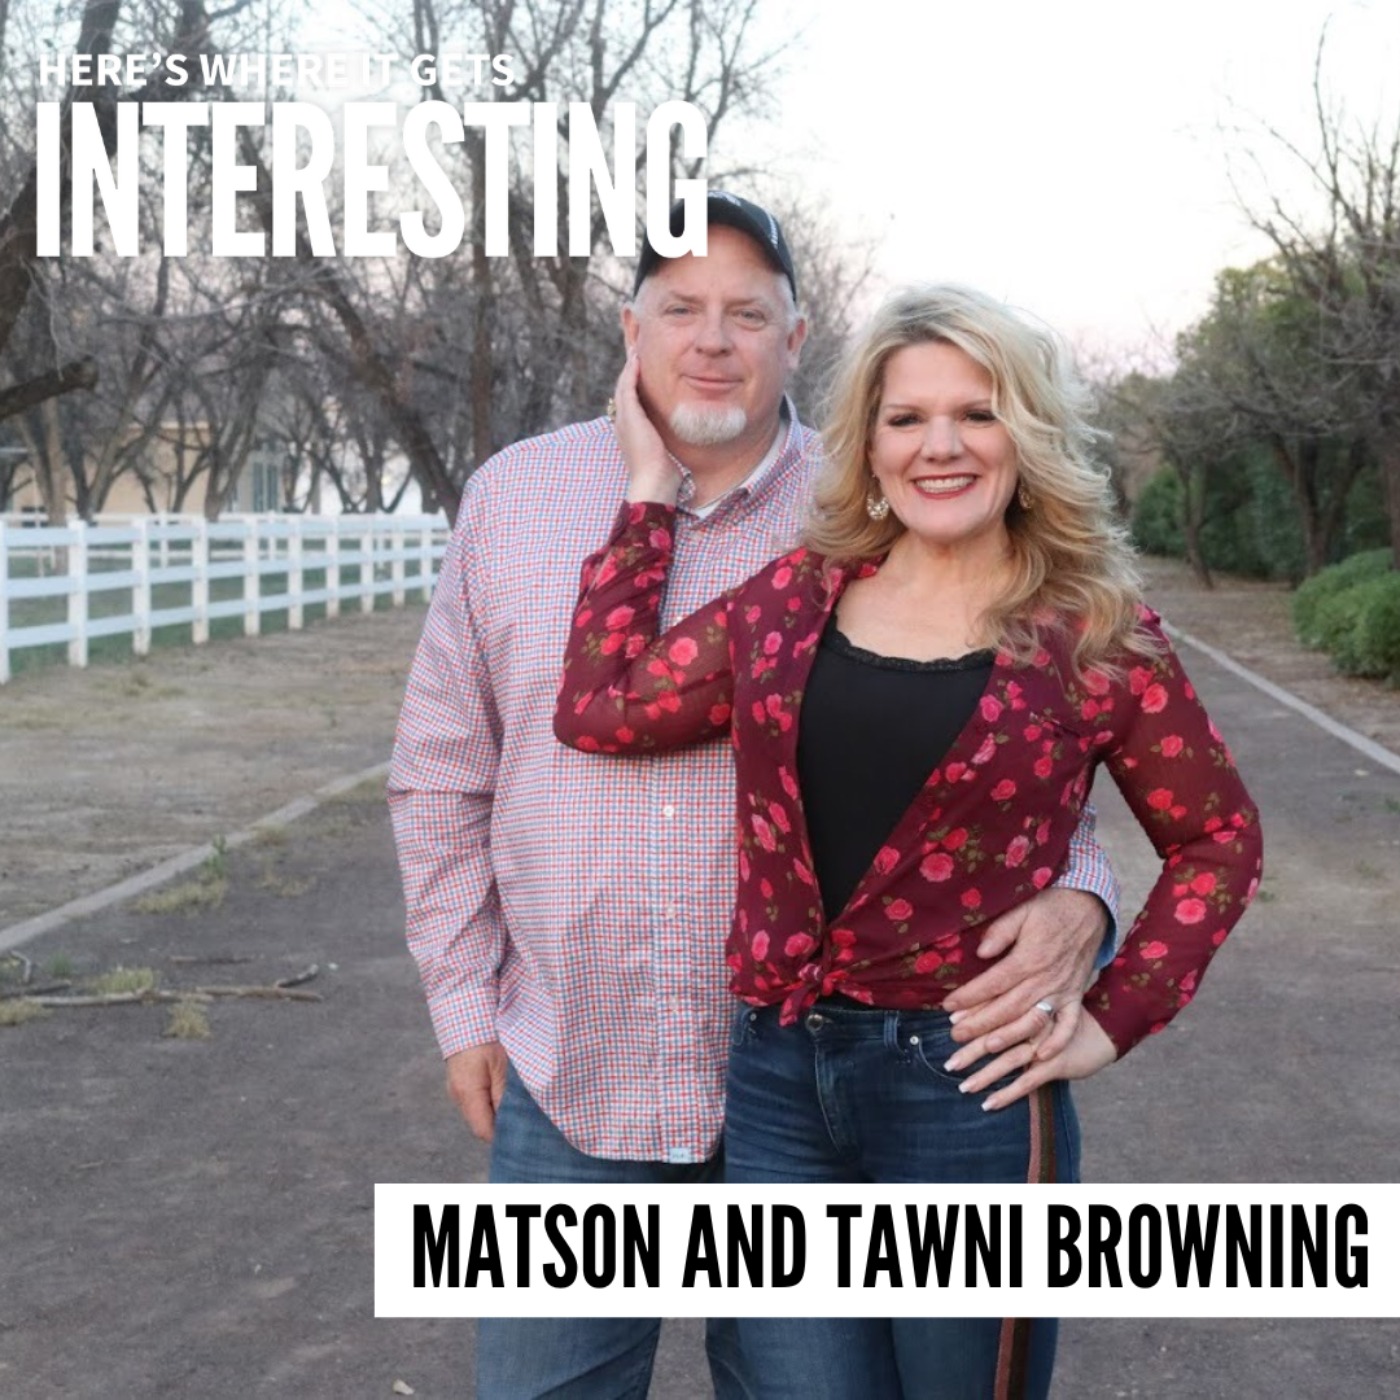 Undercover Inside Hate Groups with Matson and Tawni Browning